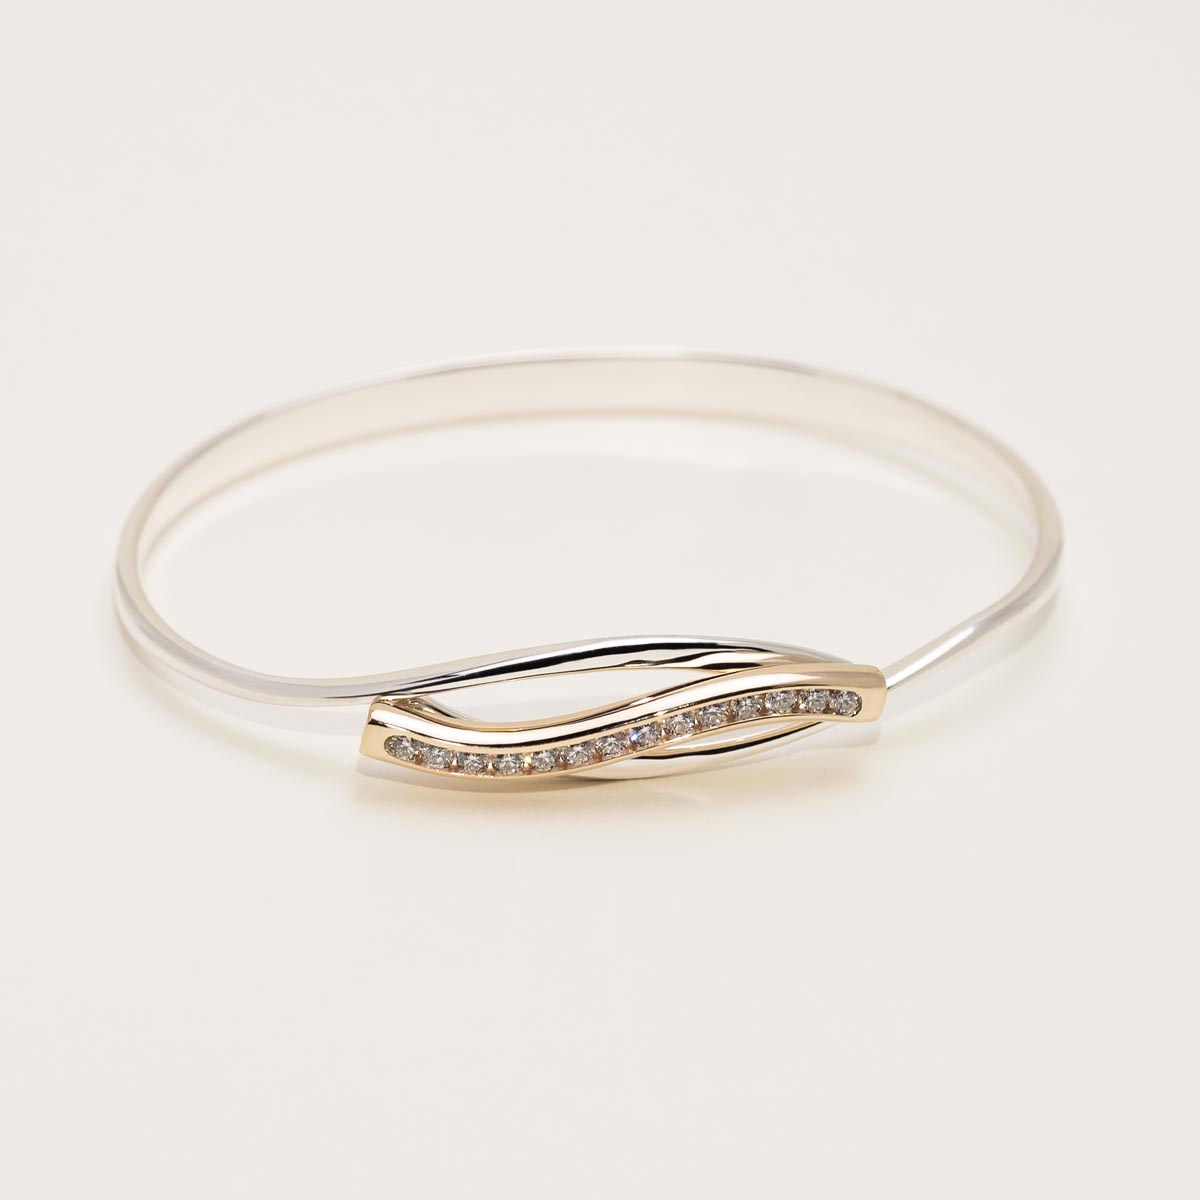 E.L. Designs Crest Bangle Bracelet in Sterling Silver and 14kt Yellow Gold with Diamonds (3/8ct tw)